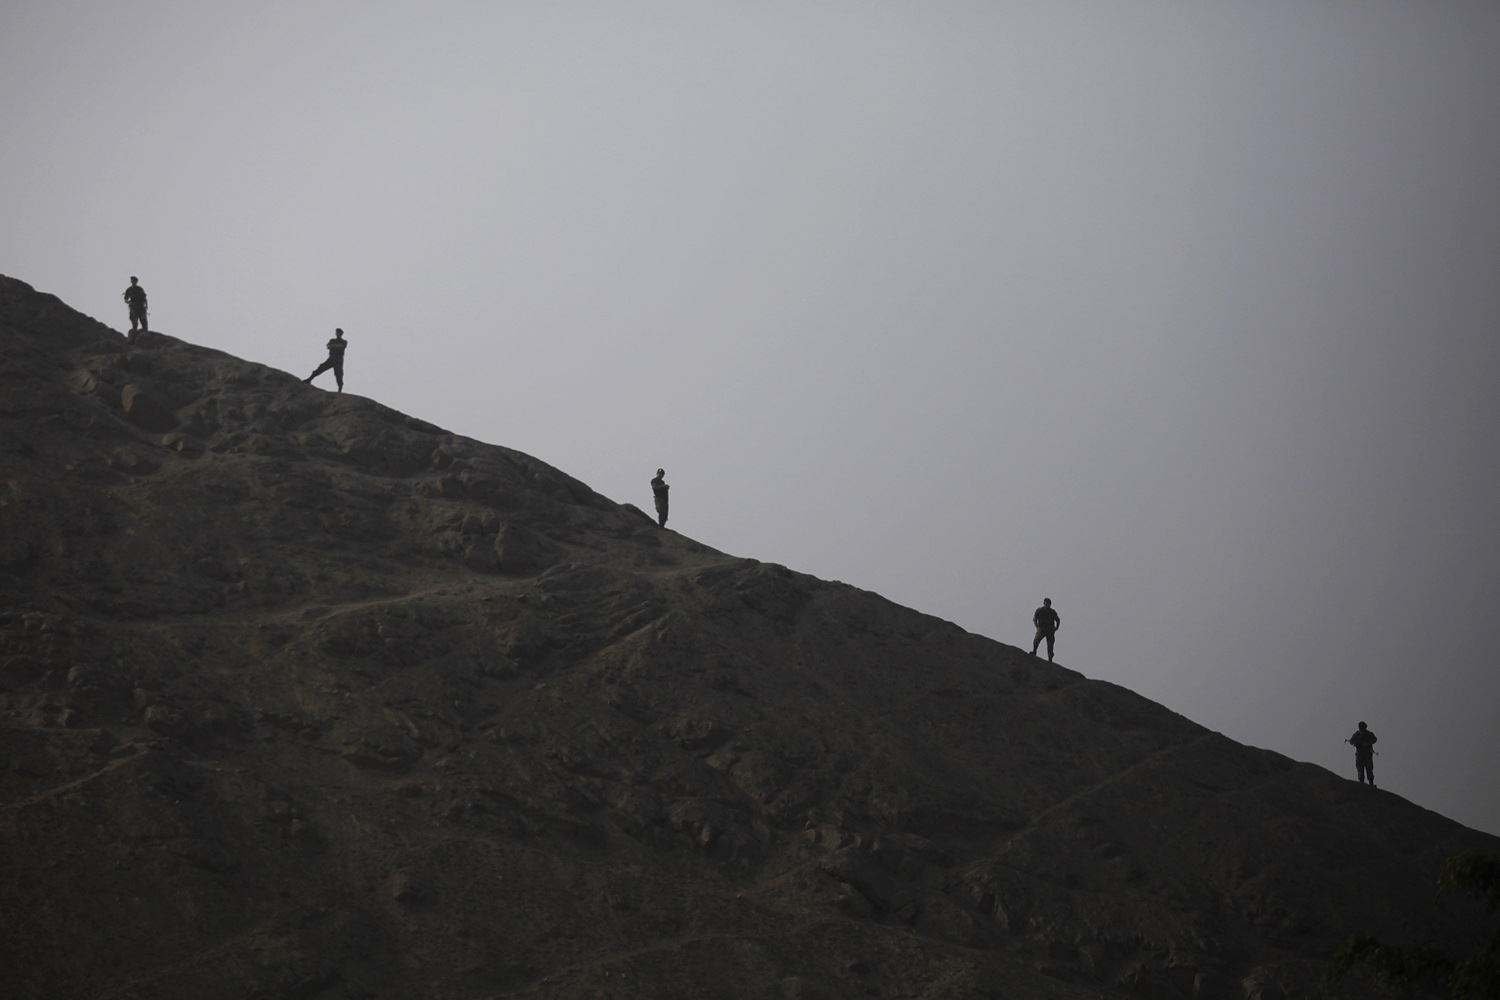 Anti-narcotics police officers guard on top of a hill near an oven during a drug incineration in Lima